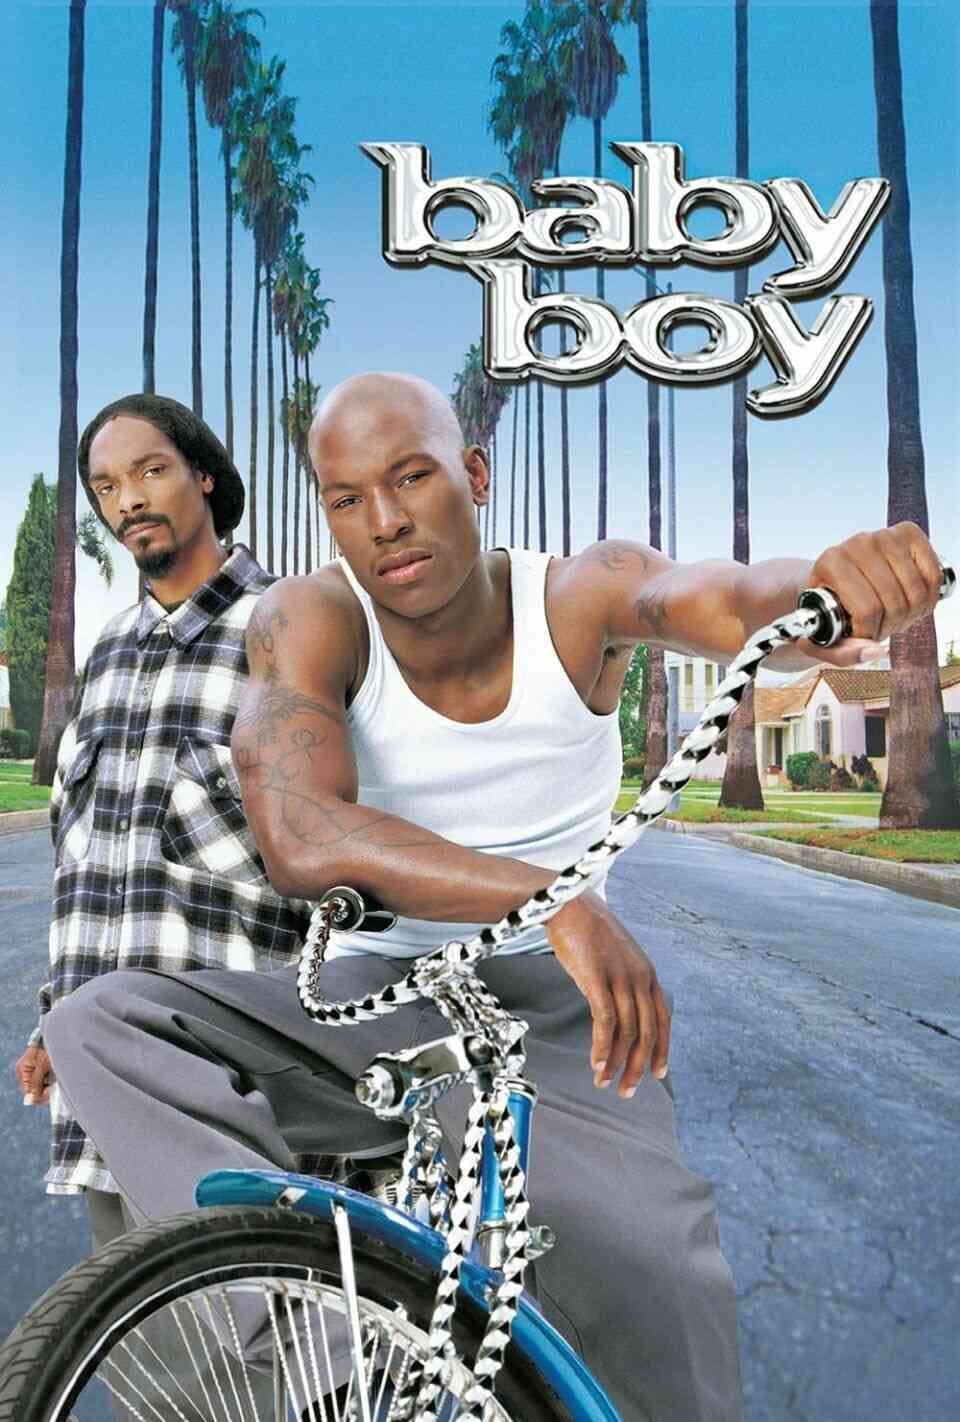 Read Baby Boy screenplay (poster)